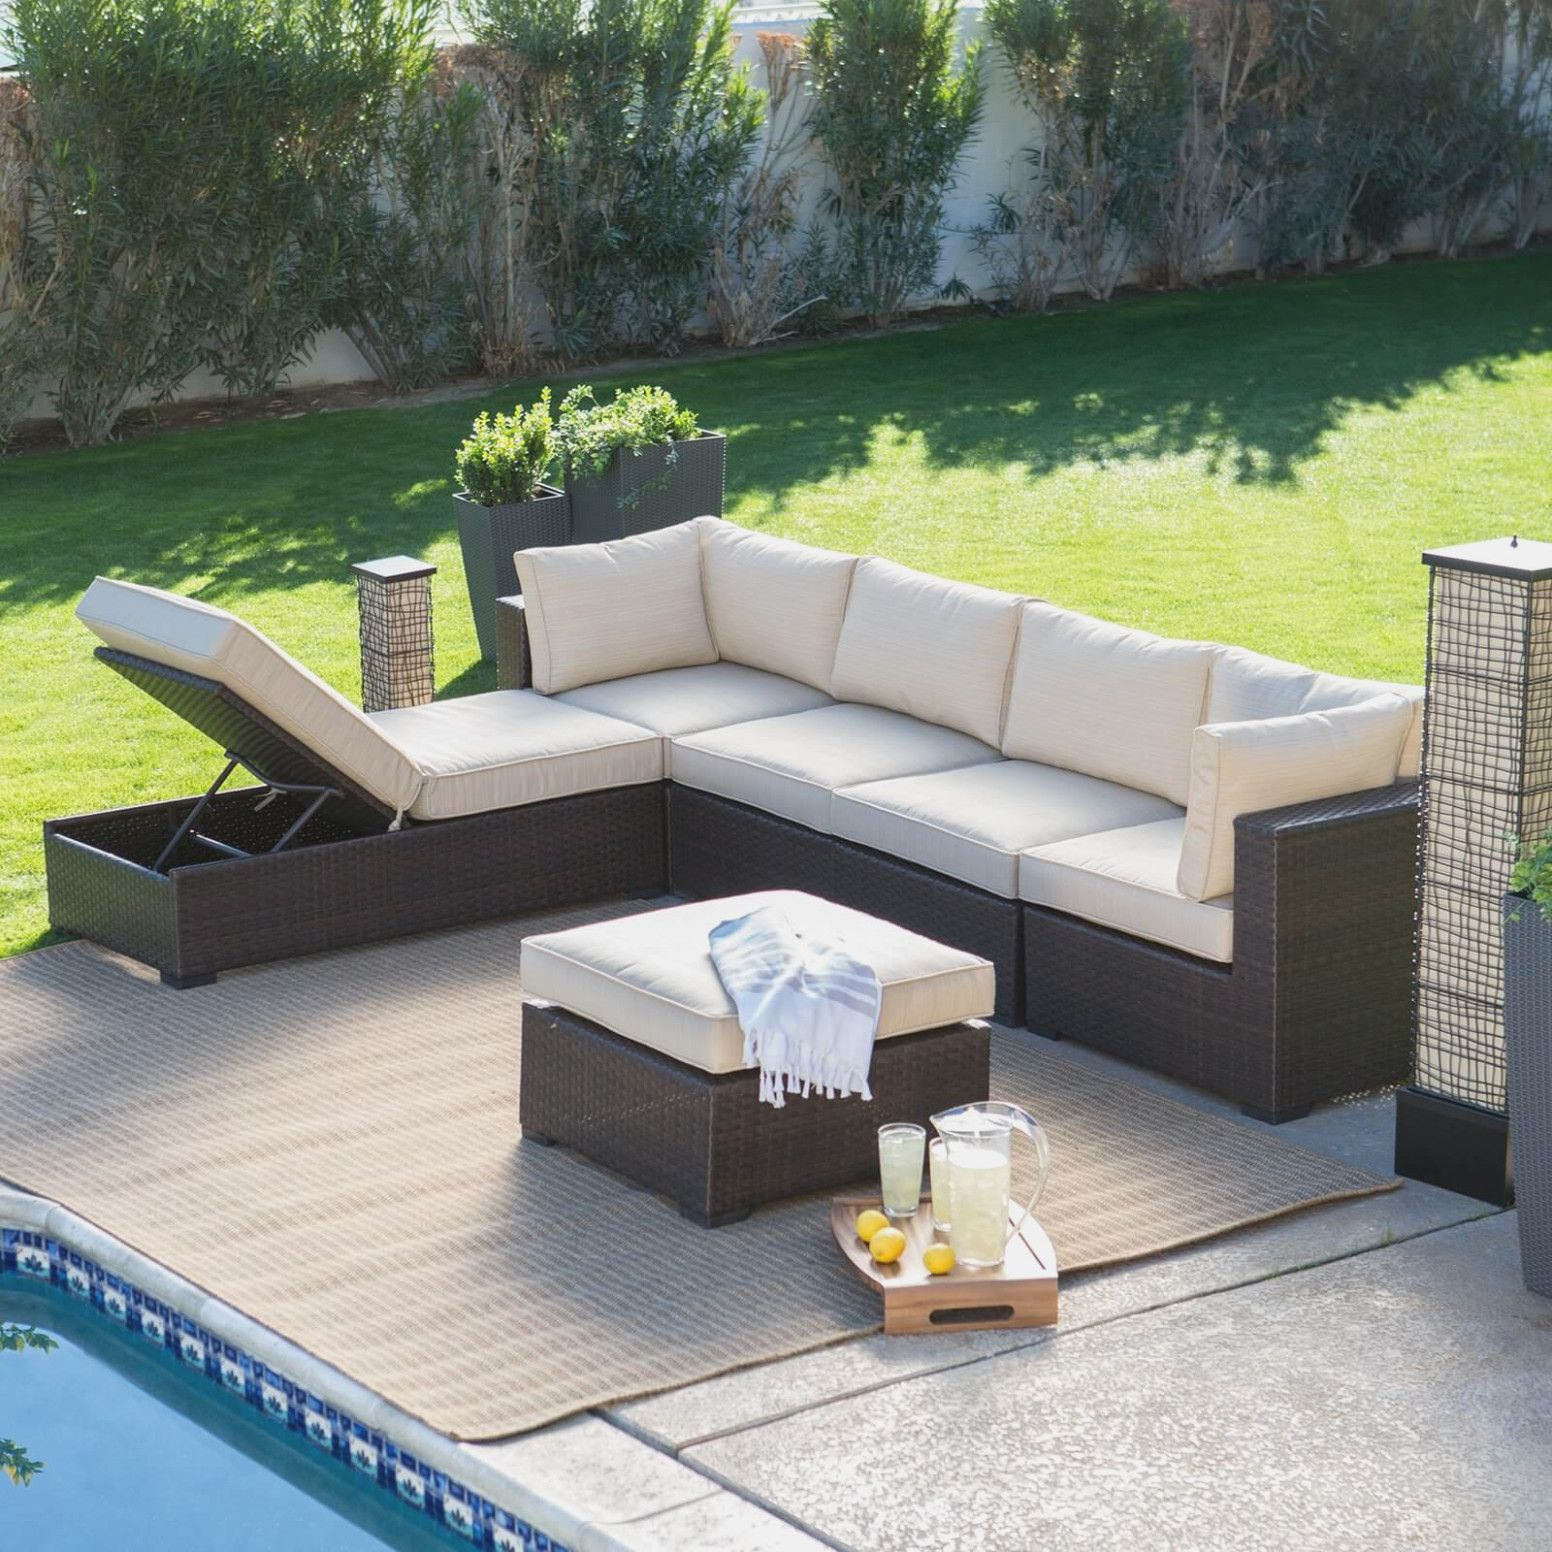 Affordable Patio Furniture Calgary Patio Furniture Covers inside proportions 1552 X 1552